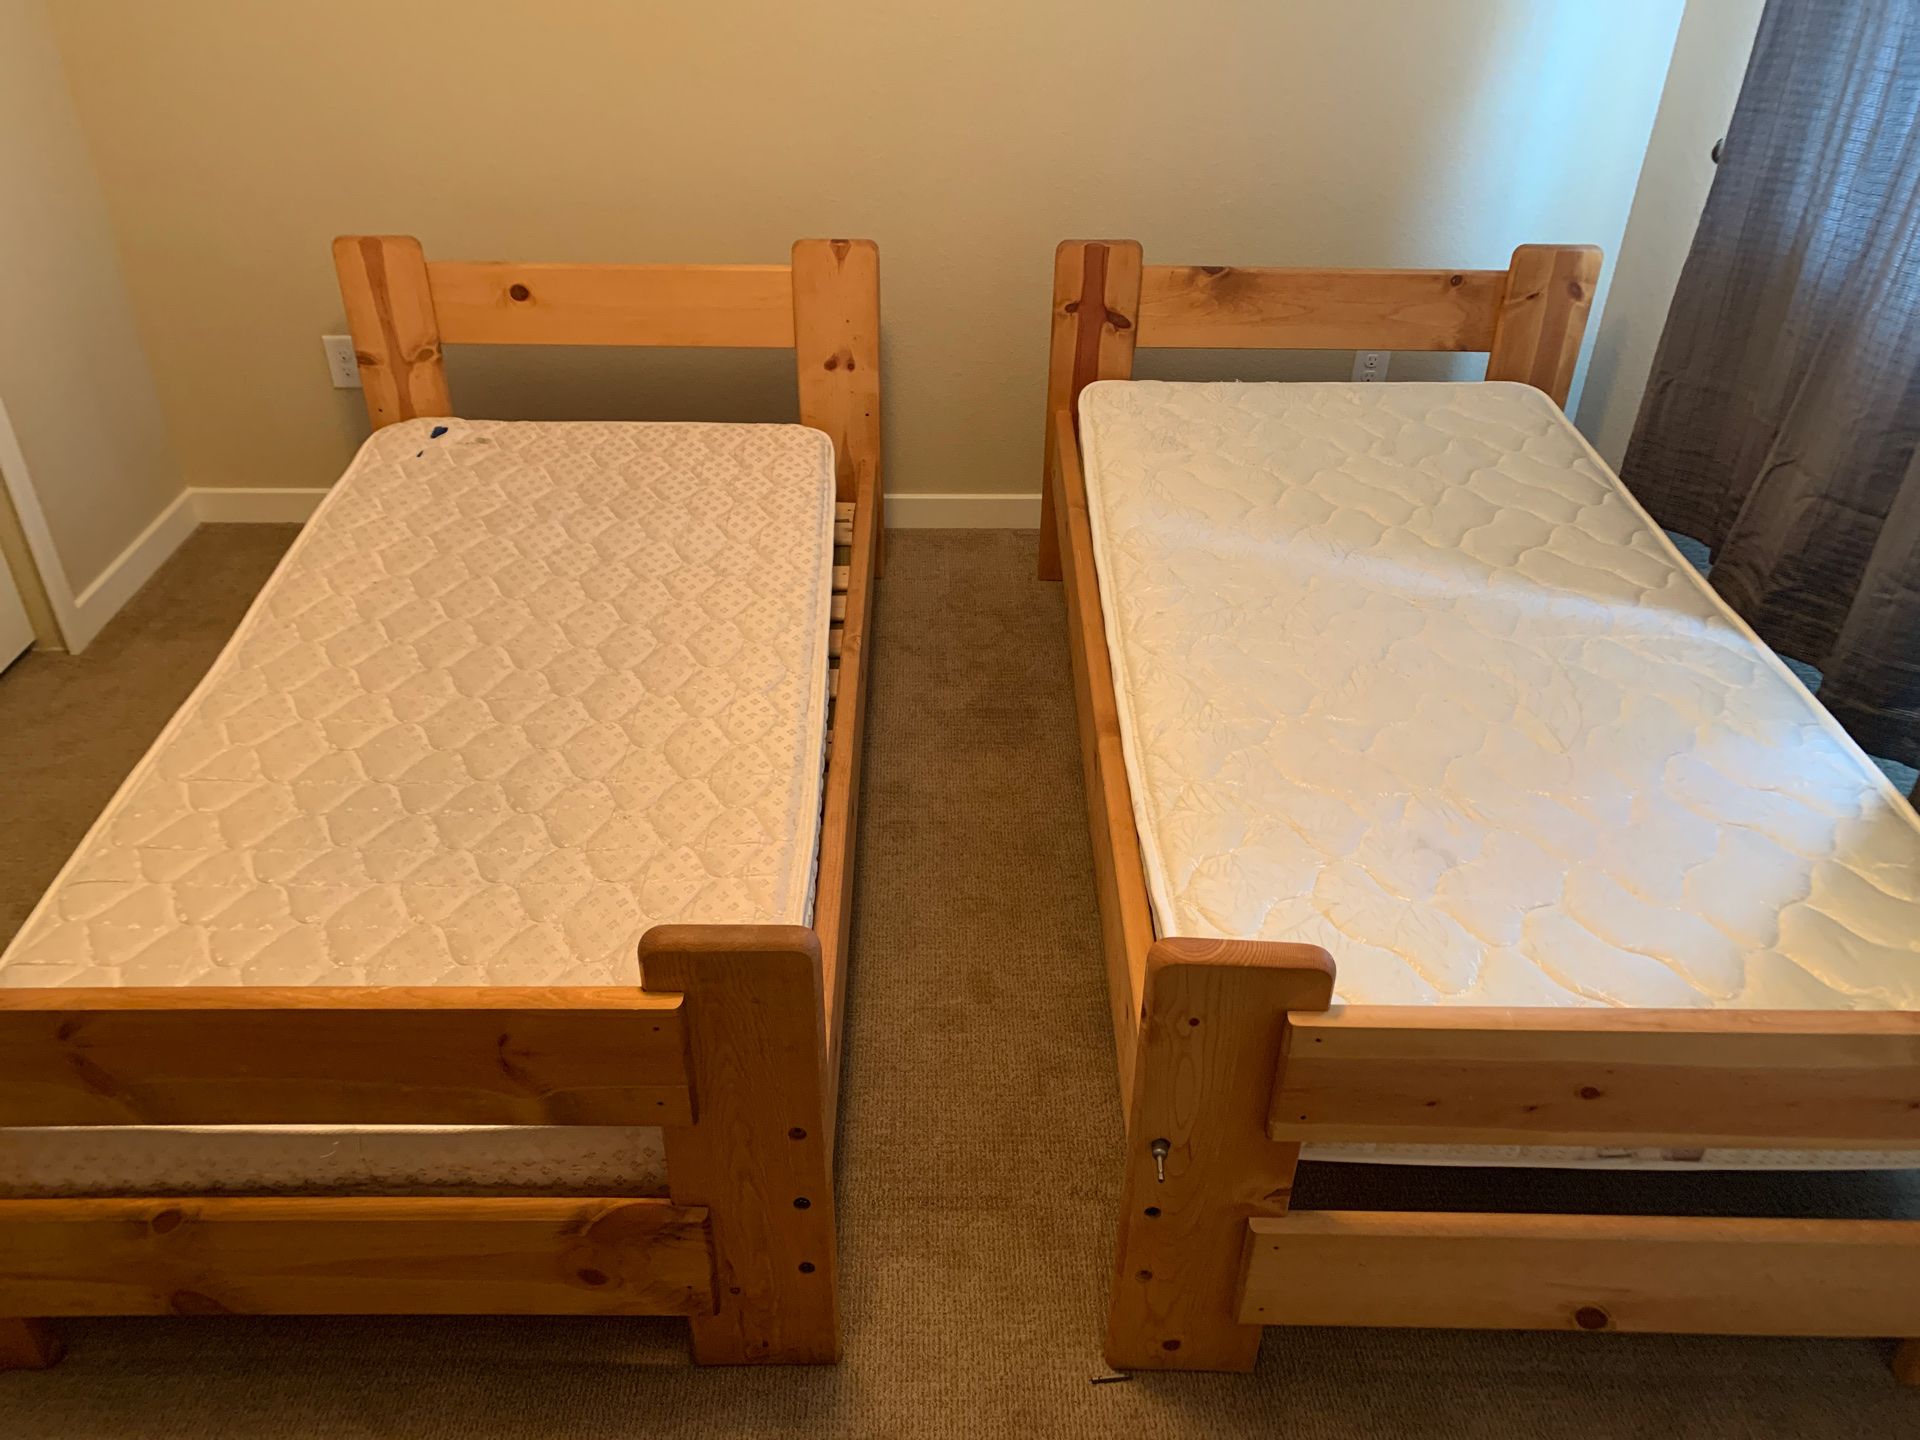 4 Piece bedroom set. Two twin beds, two mattresses